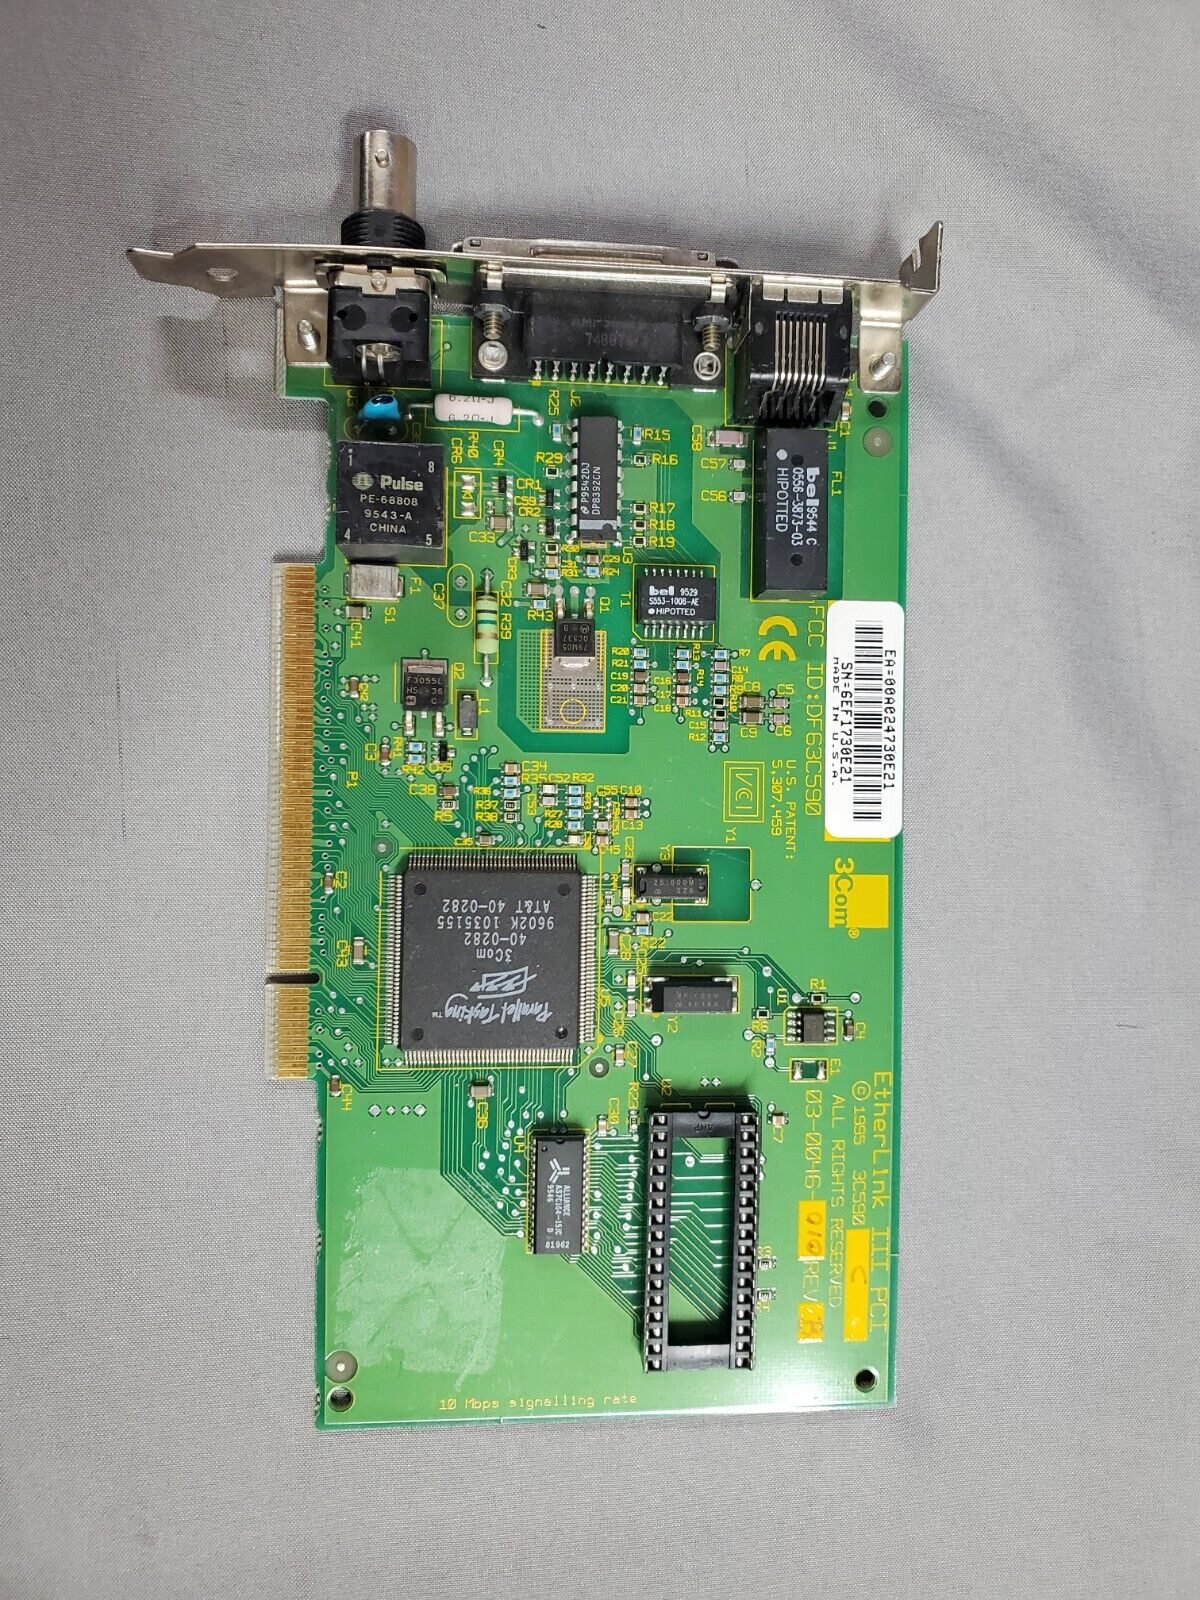 3COM Etherlink III 3C590 PCI Network Interface Card. untested